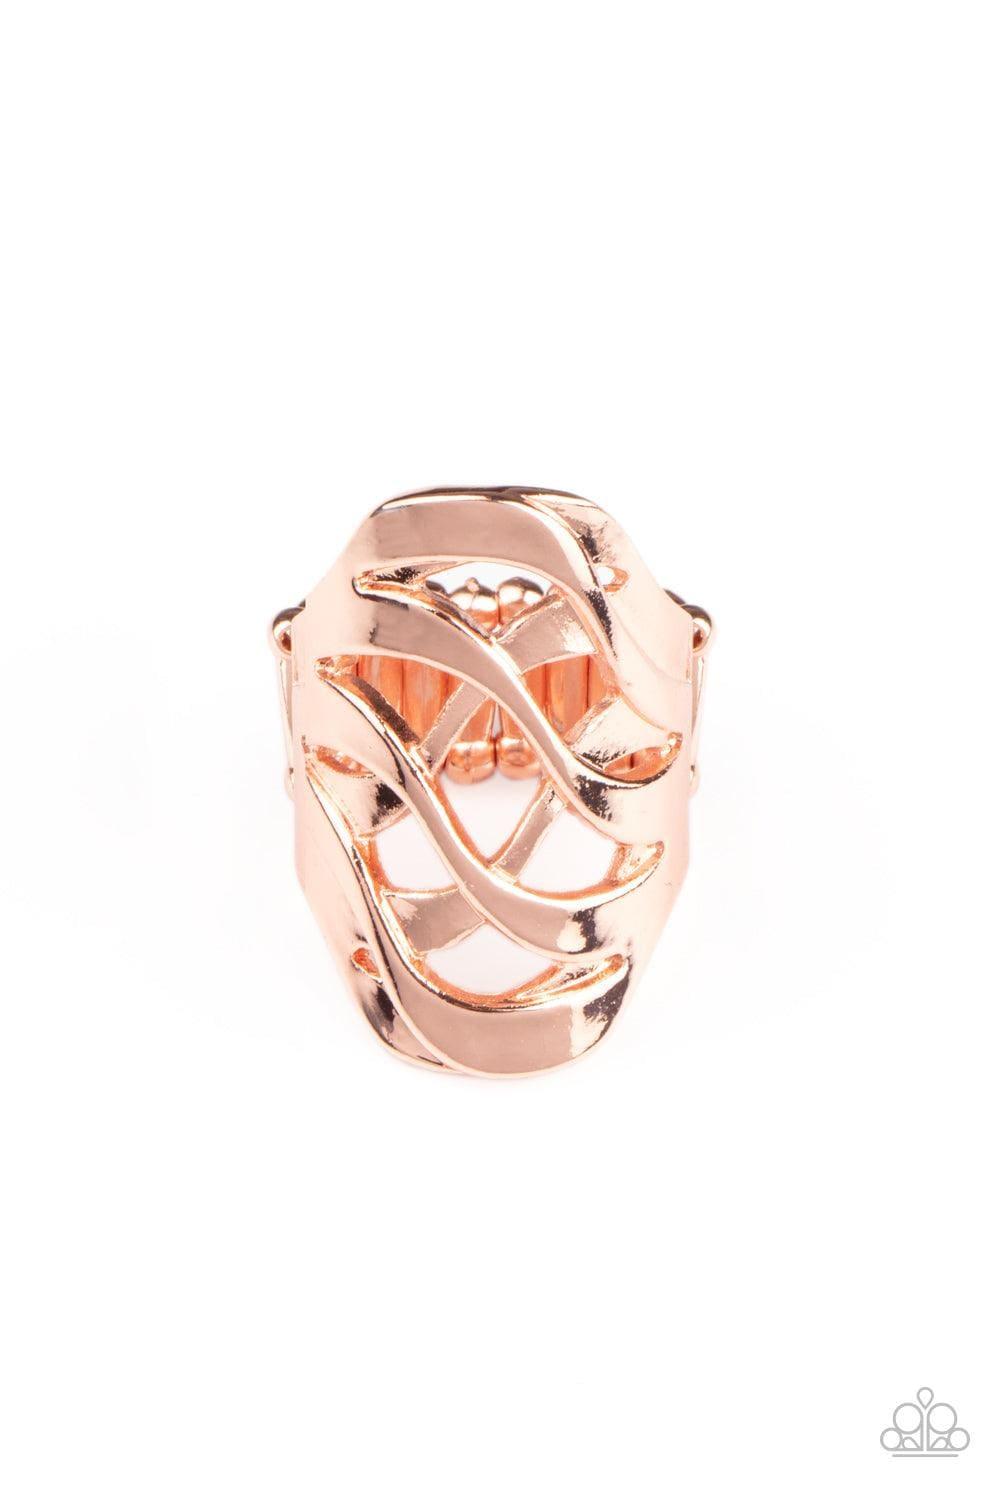 Paparazzi Accessories - Open Fire - Copper Ring - Bling by JessieK